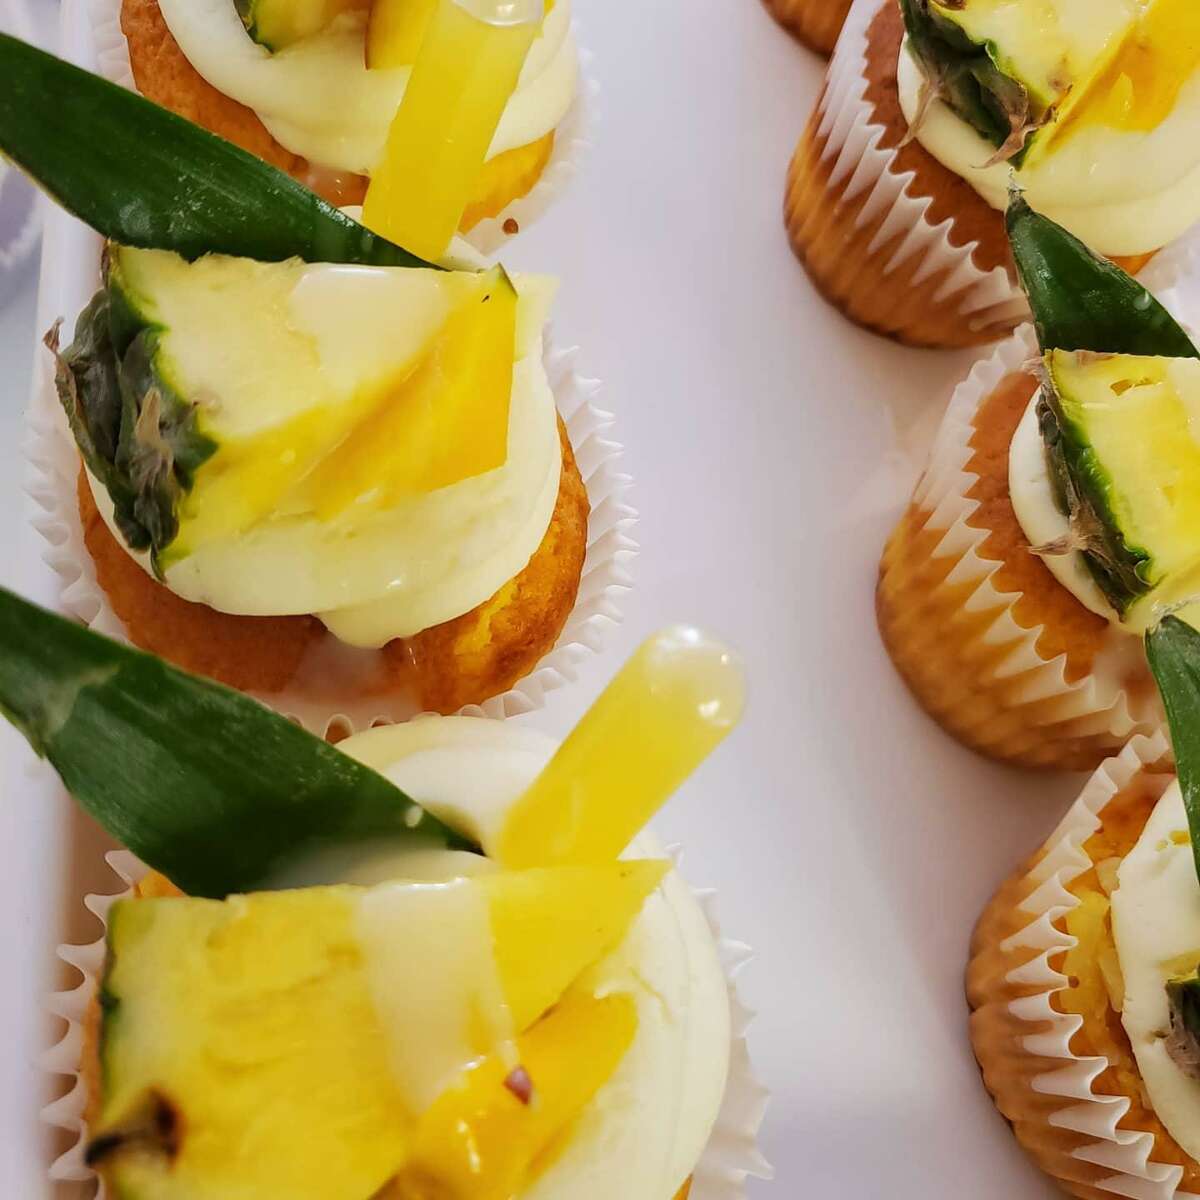 Mango coconut pineapple cupcakes from Edible Couture.